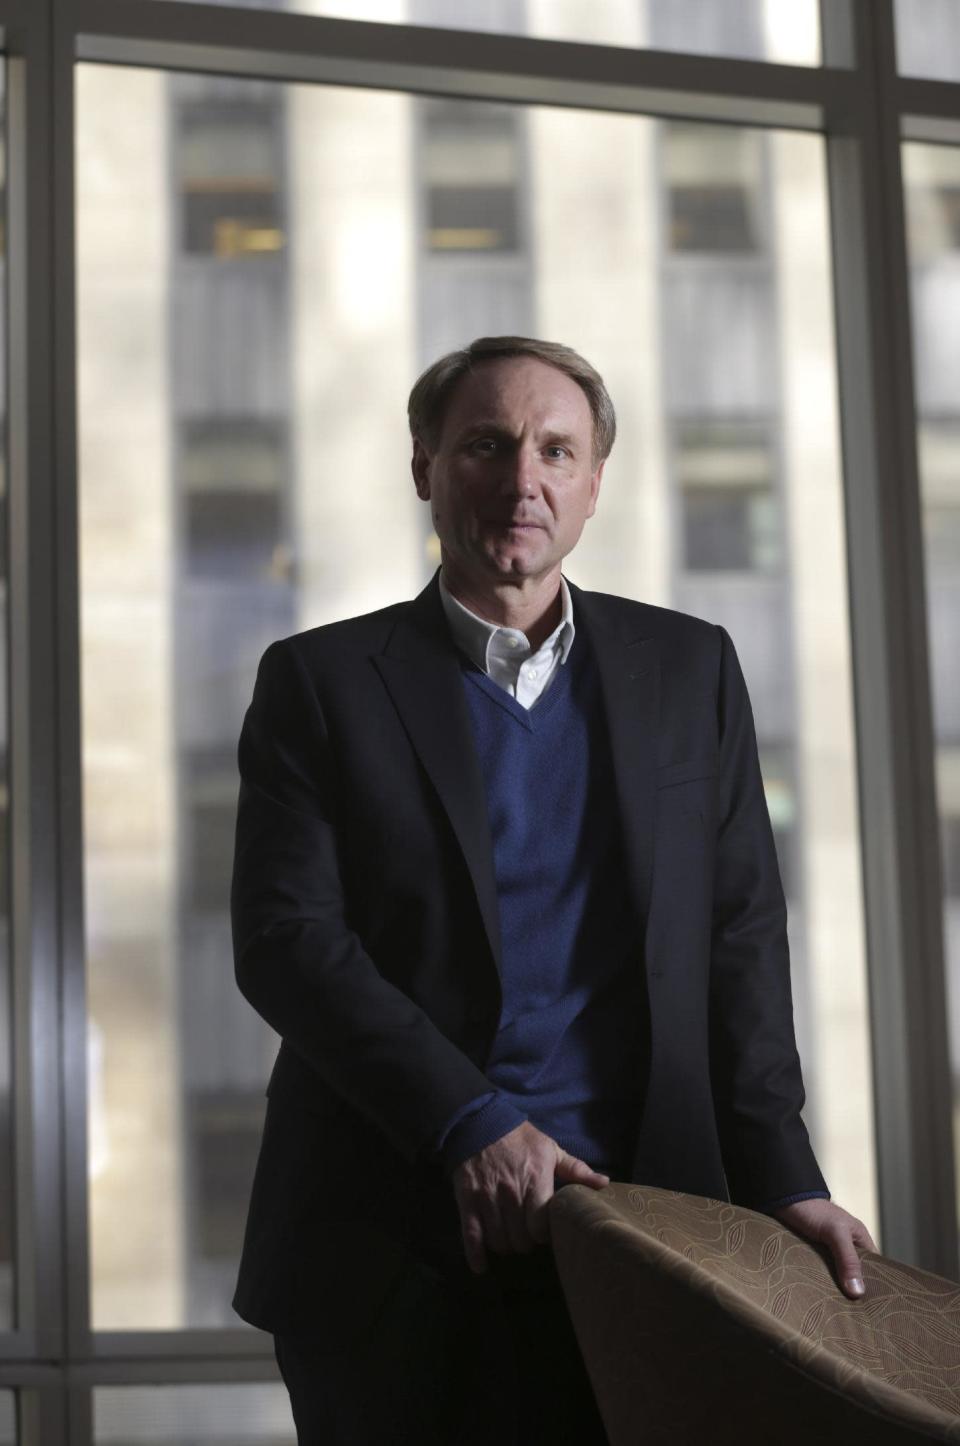 In this Monday, May 13, 2013 photo, author Dan Brown poses for a portrait in New York. His new book, "Inferno," published by Doubleday releases on May 14, 2013. (AP Photo/Seth Wenig)